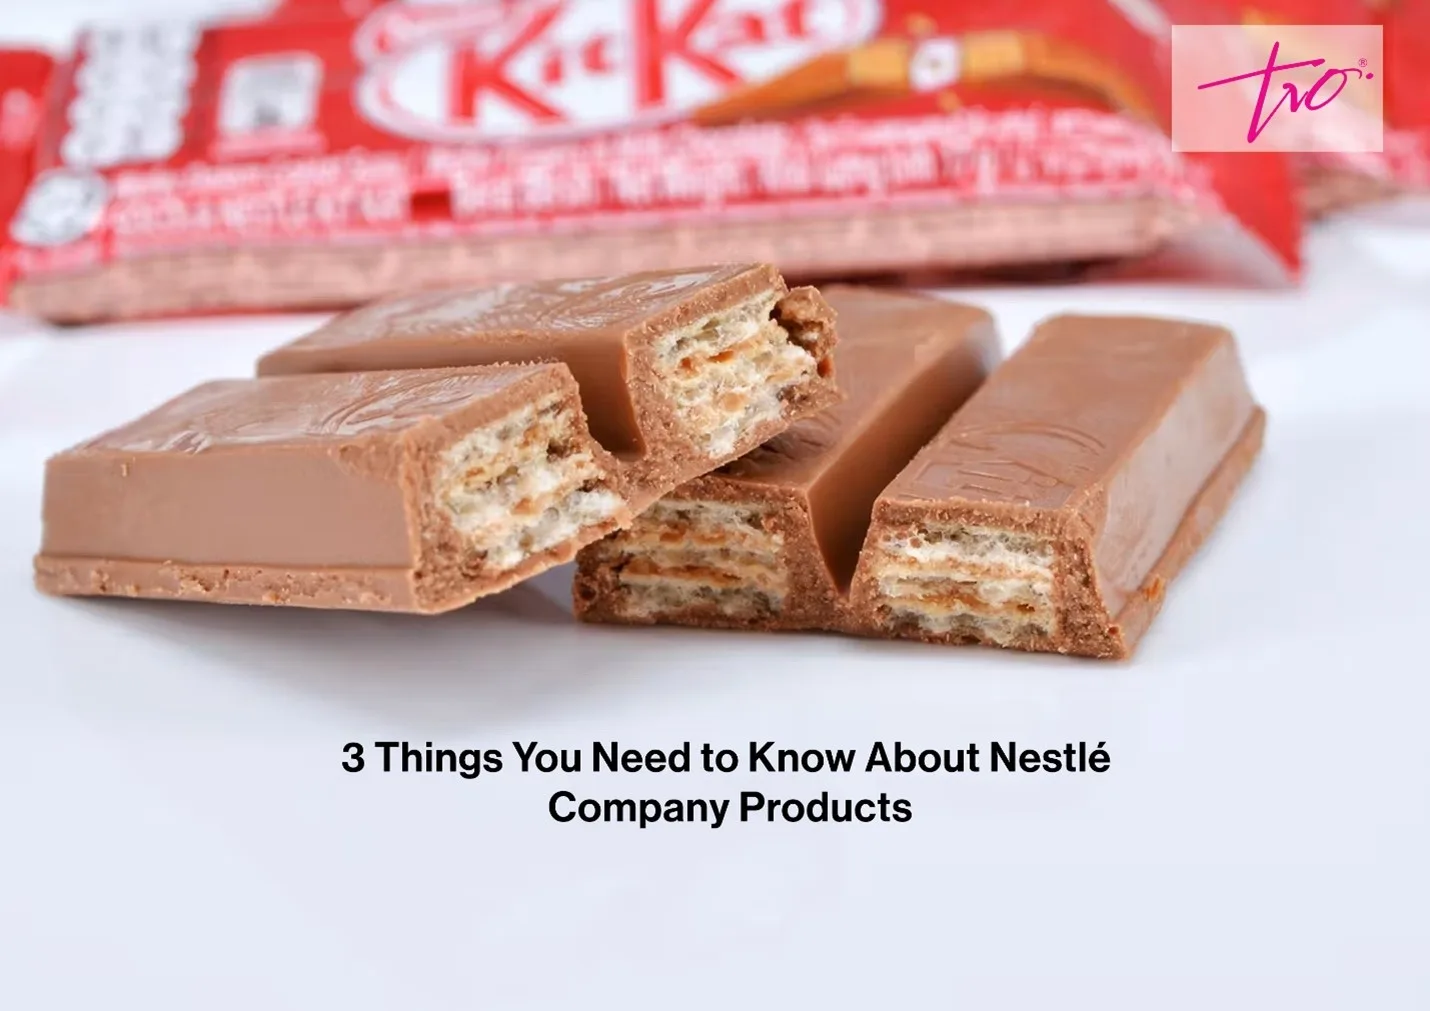 3 Things You Need to Know About Nestlé Company Products